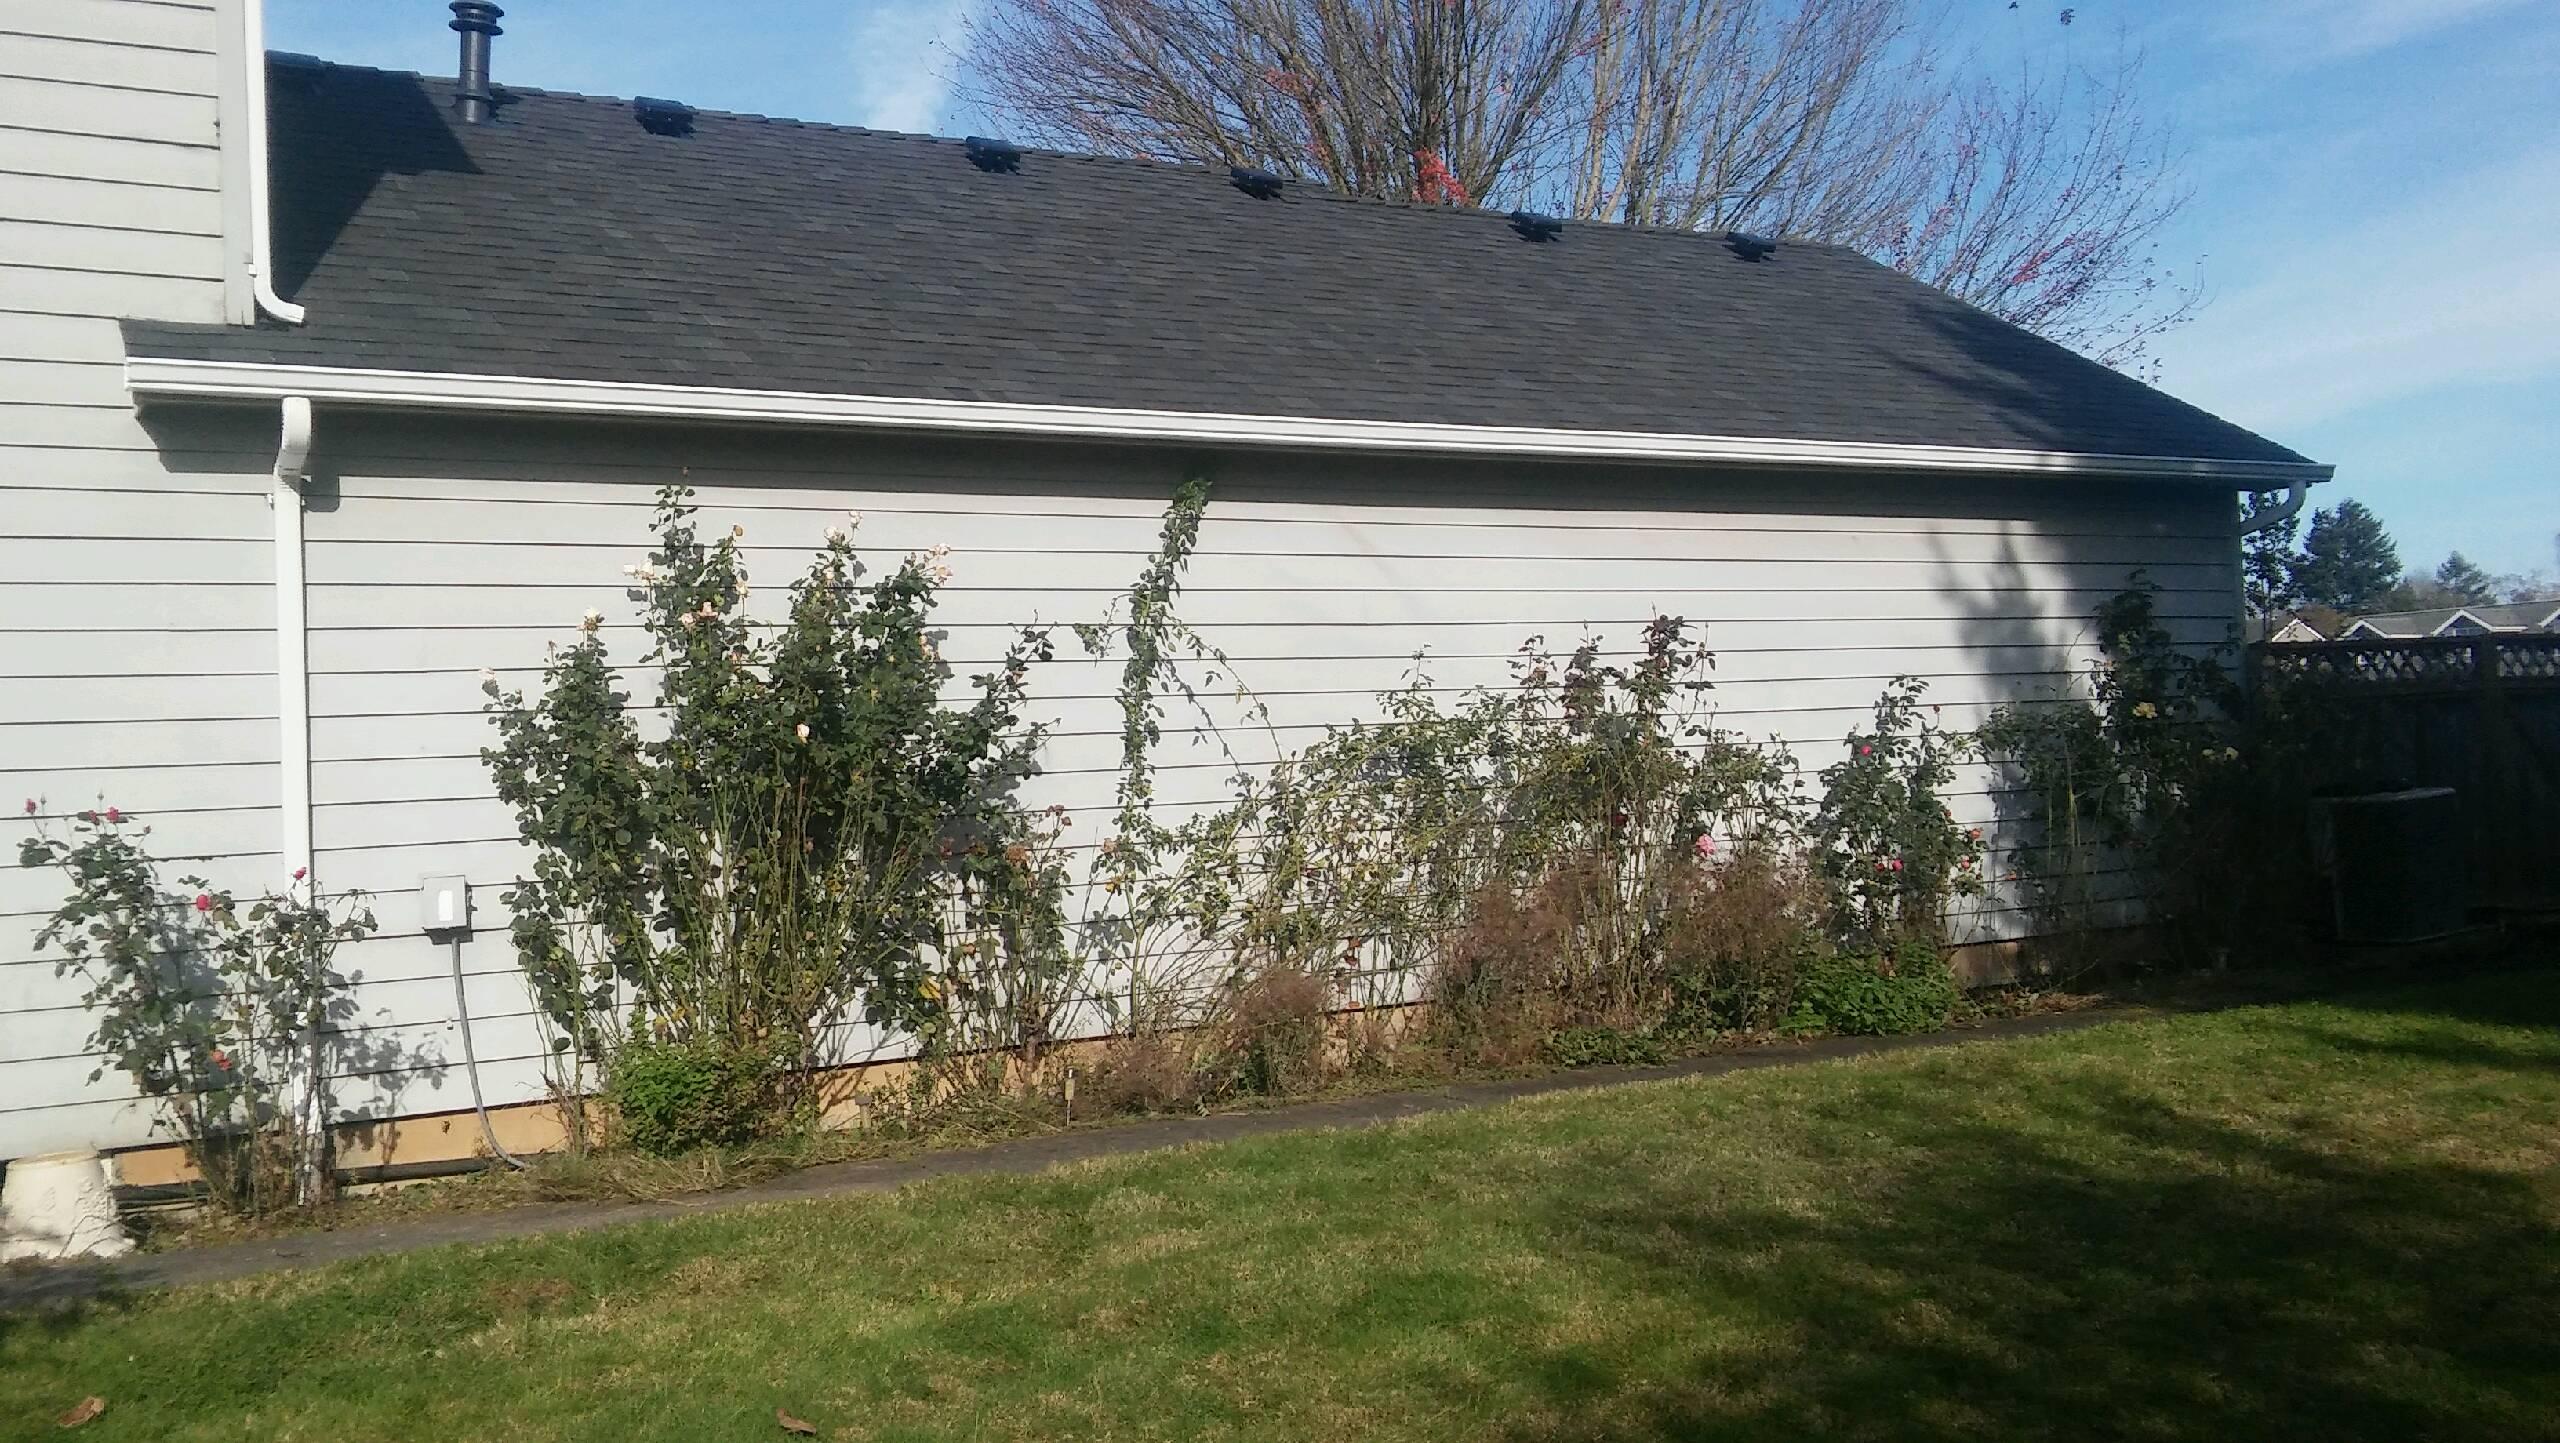 Valley Roofing of Oregon Did the roof on this home and garage